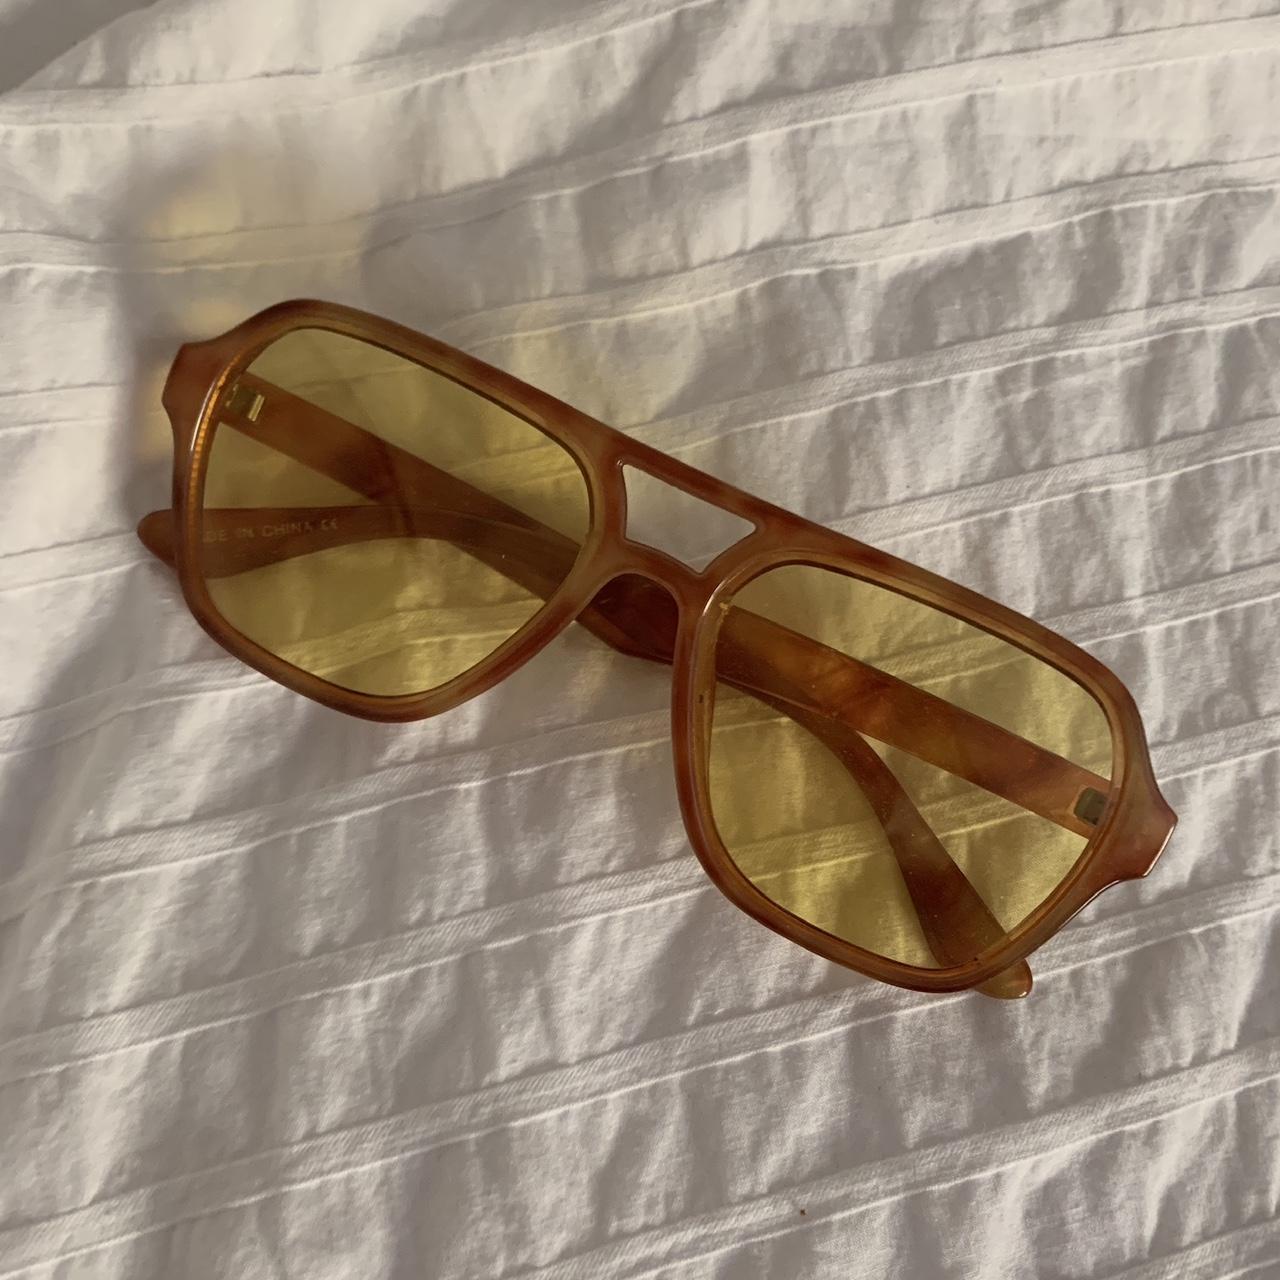 Urban Outfitters Women's Yellow and Orange Sunglasses